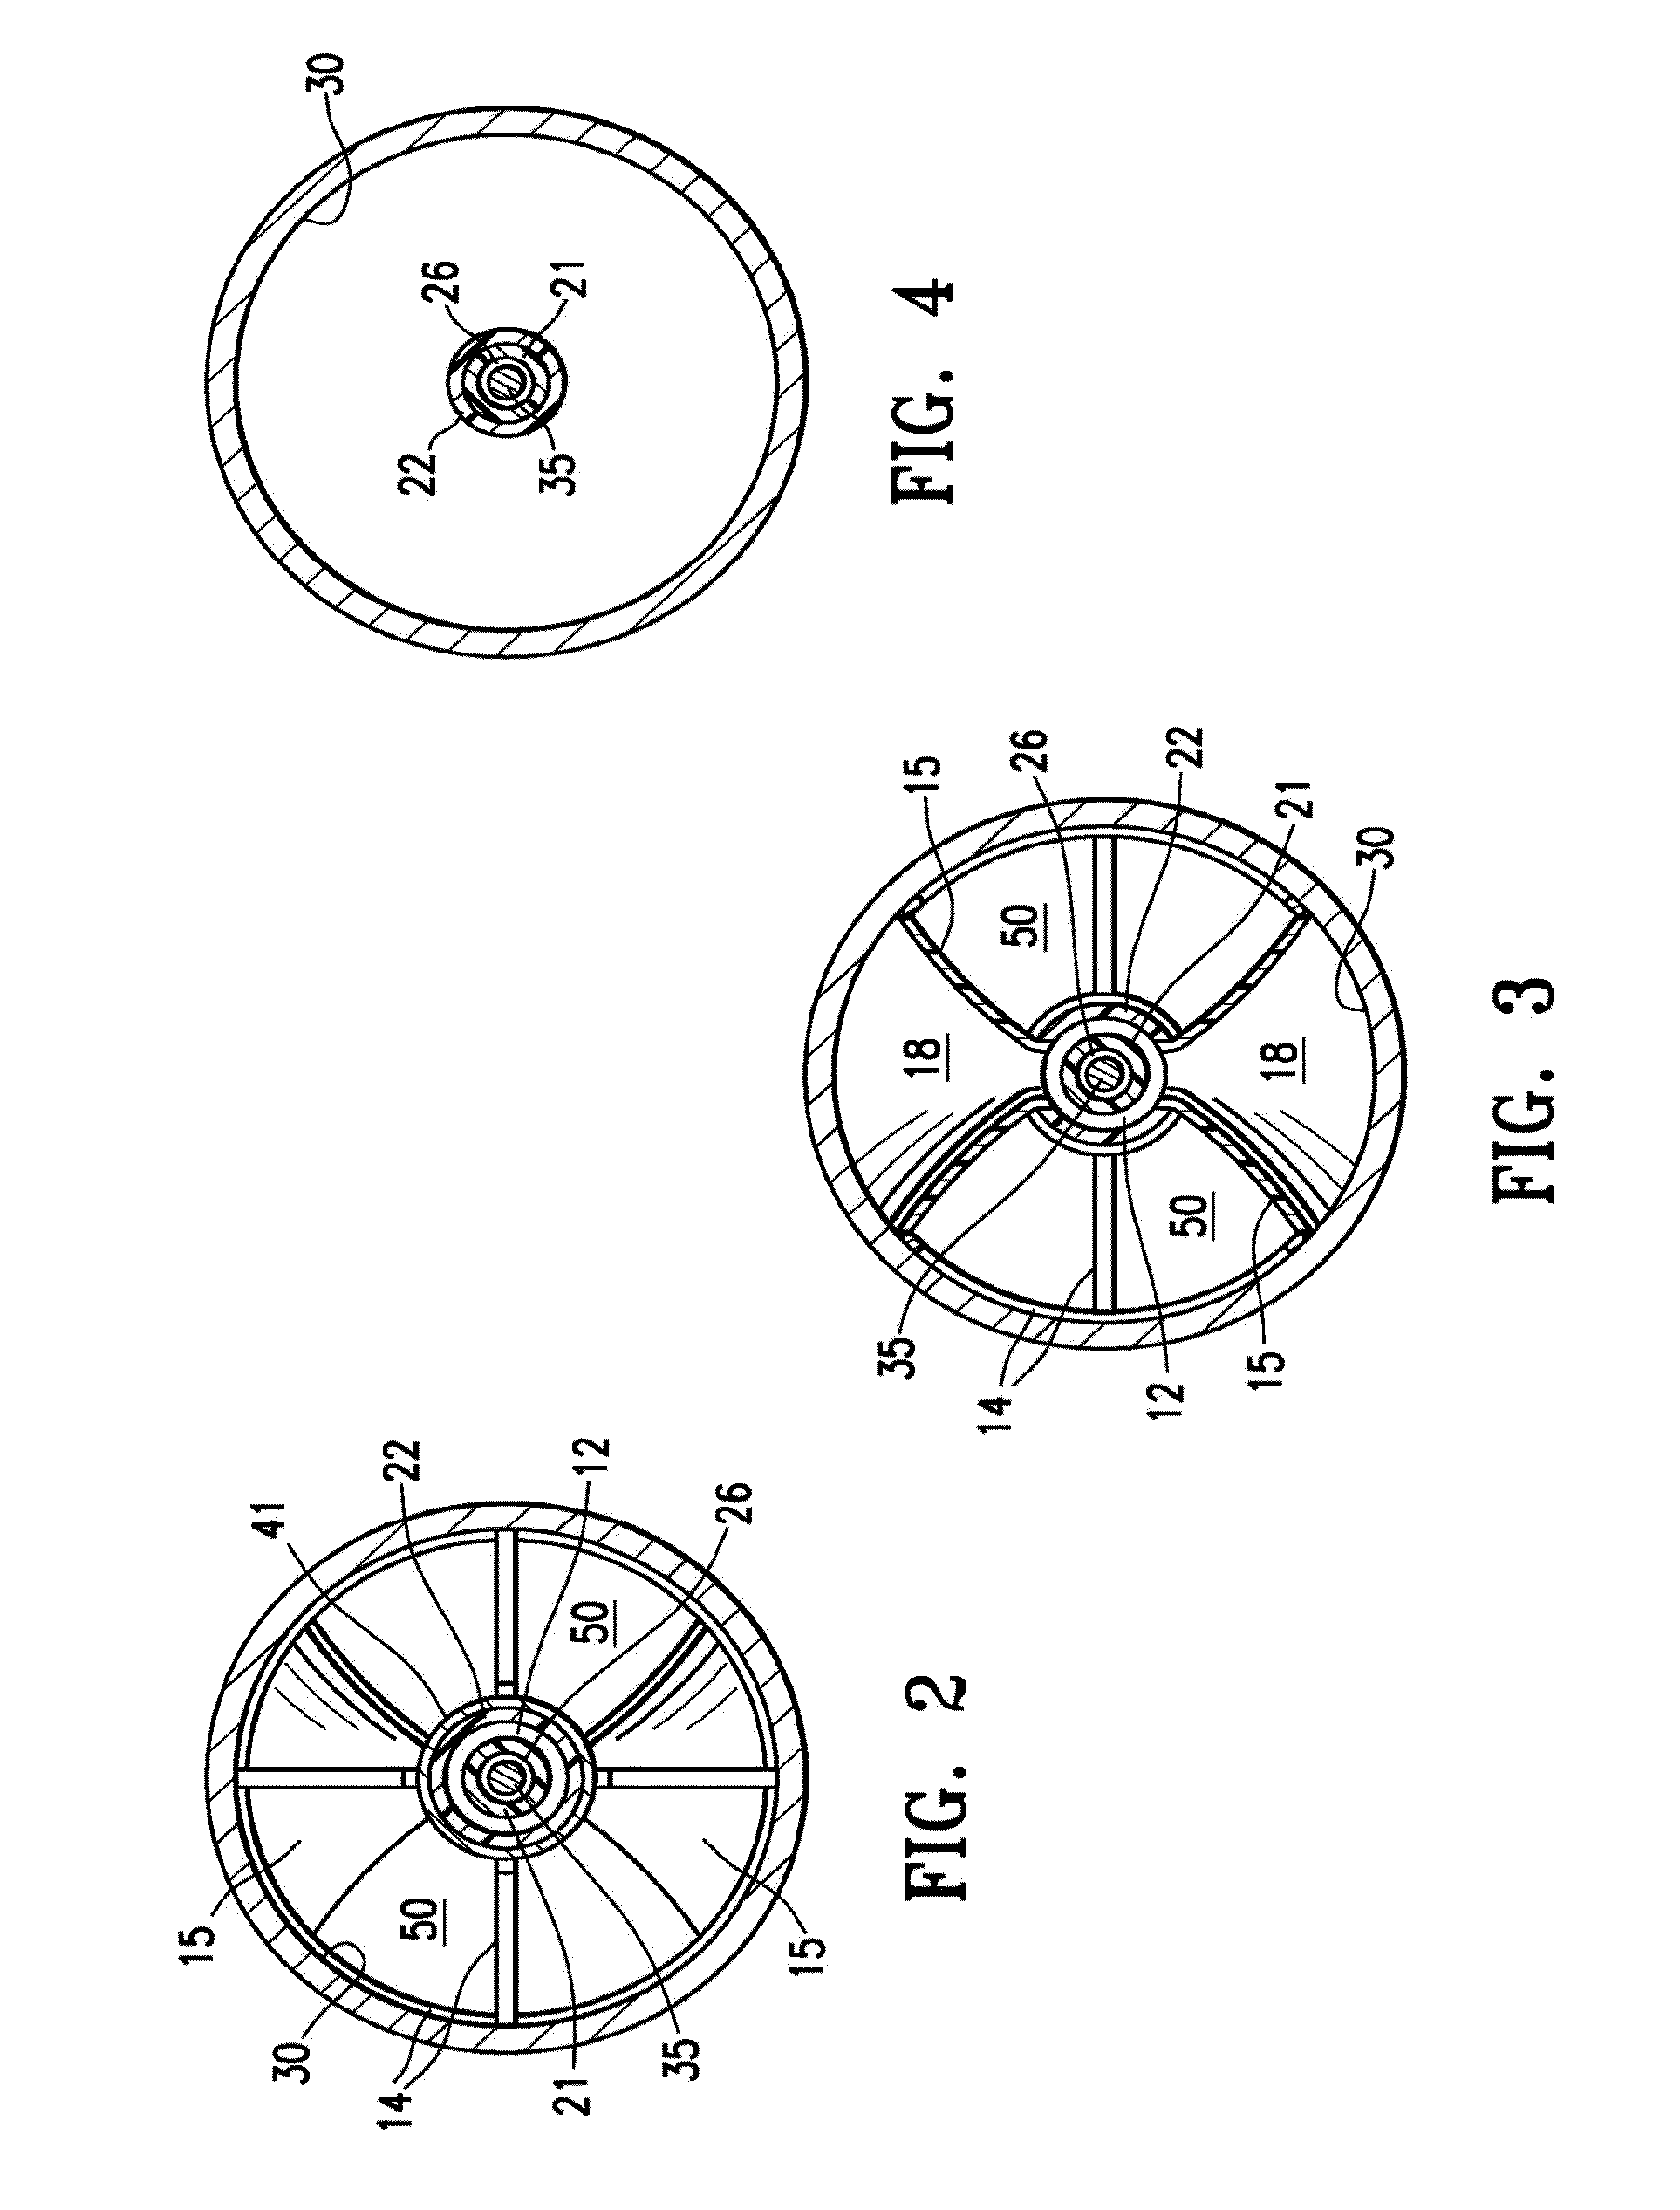 Perfusion catheter having array of funnel shaped membranes